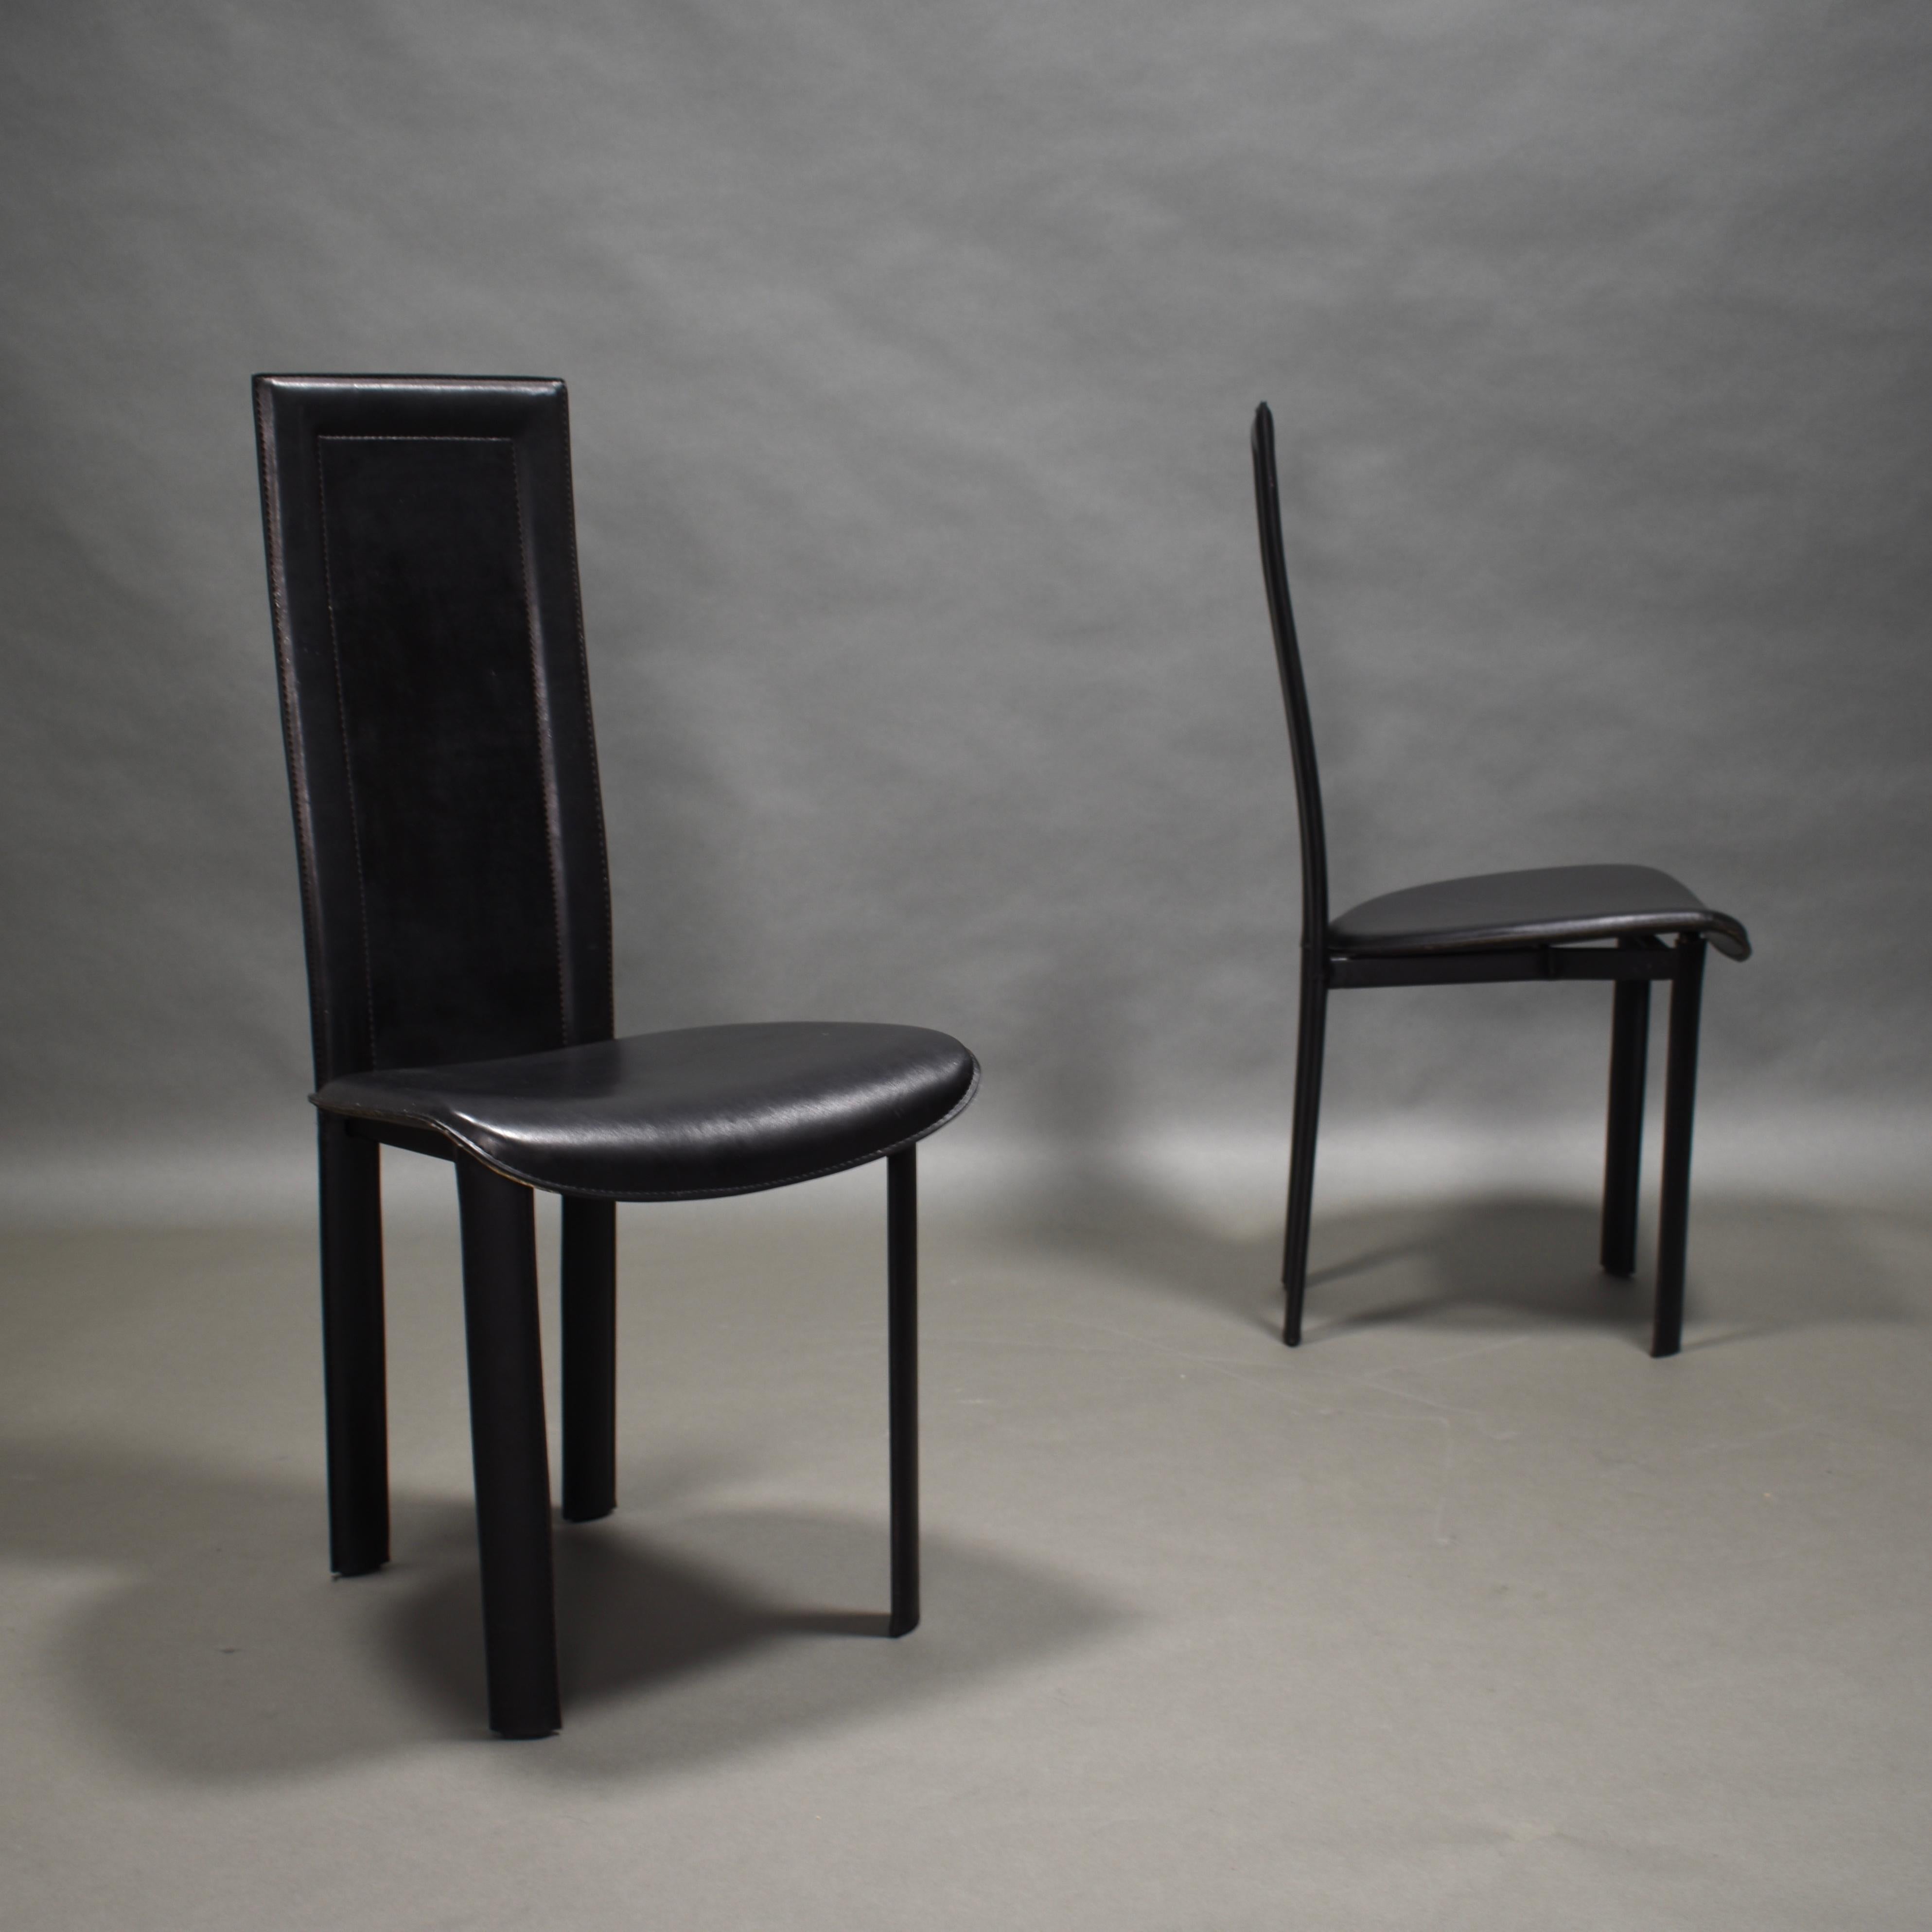 Pair of QUIA ‘Elena B’ Italian black leather high back dining chairs, 1970-1980.

Designer: Unknown

Manufacturer: Quia

Country: Italy

Model: Elena B

Material: black leather

Design period: circa 1970-1980

Date of manufacturing: